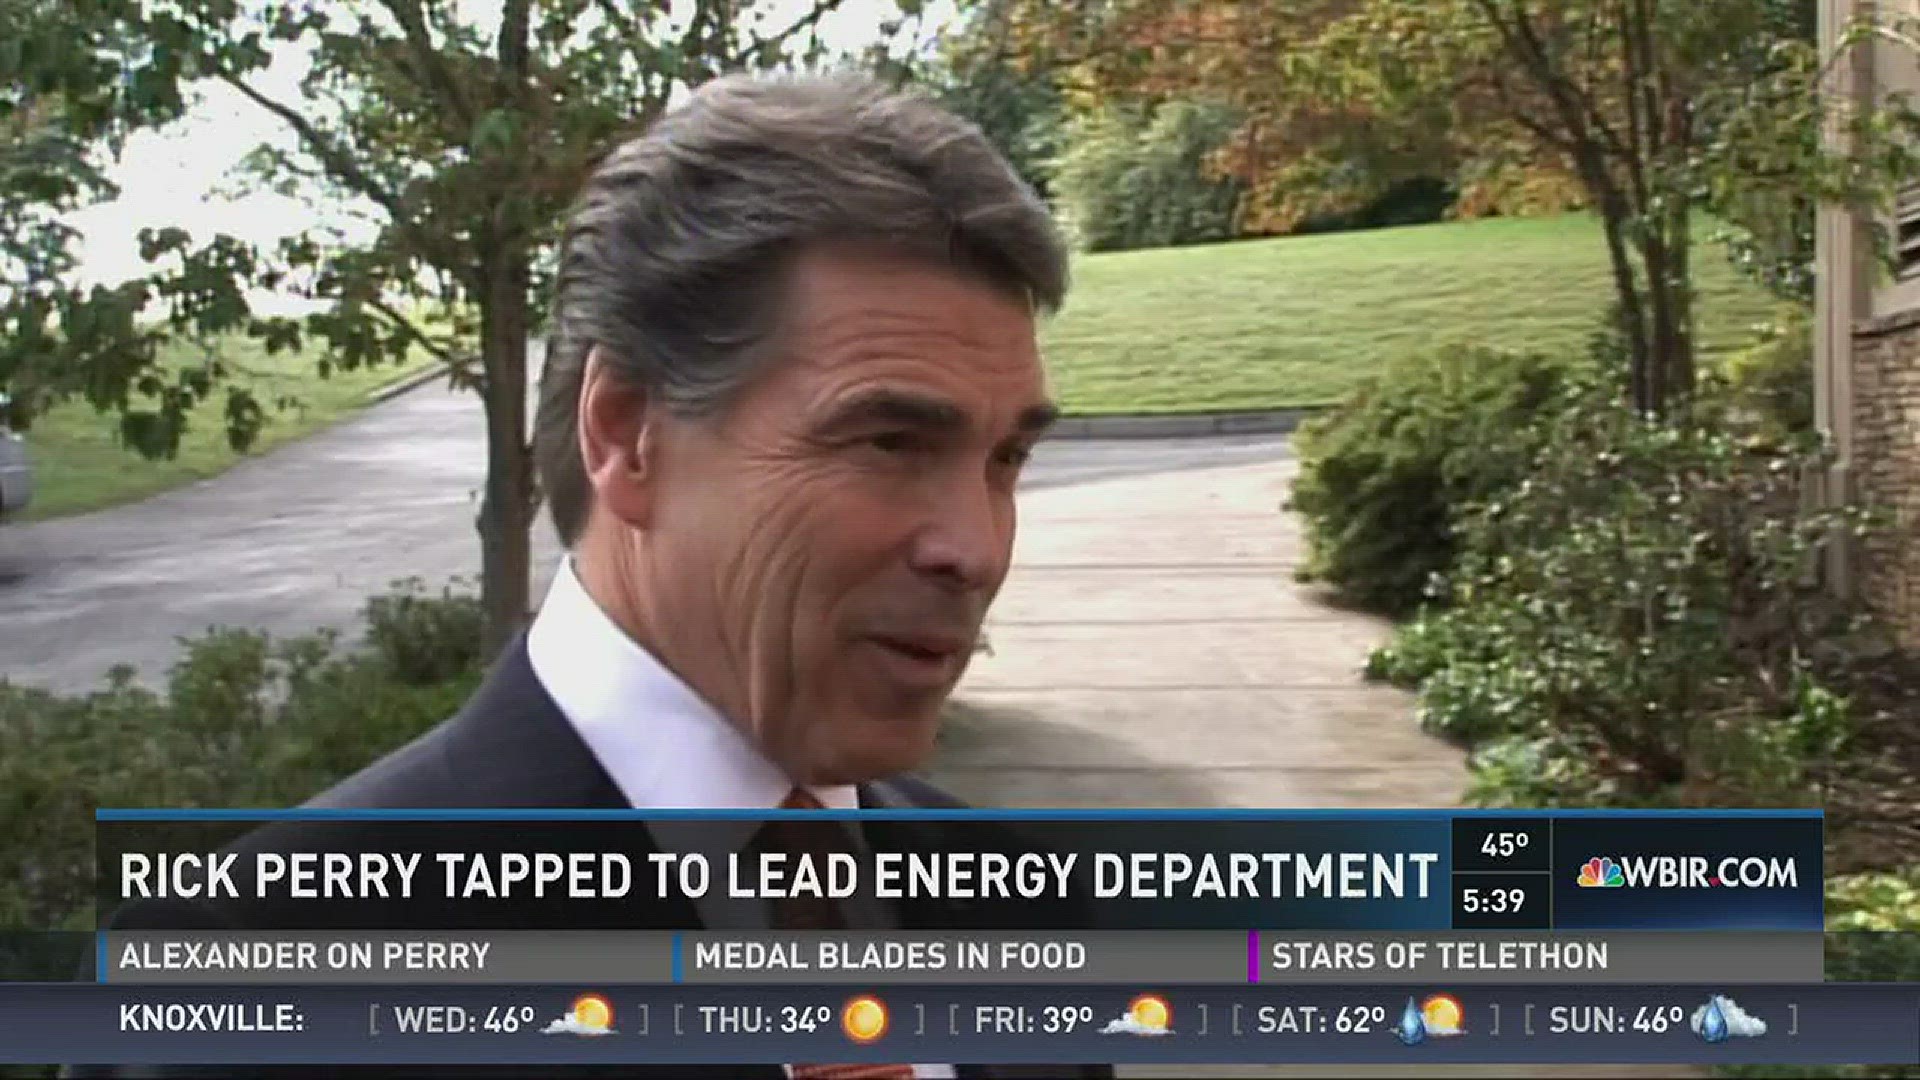 Dec. 13, 2016: President-elect Donald Trump has chosen former Texas Governor Rick Perry to lead the Energy Department.